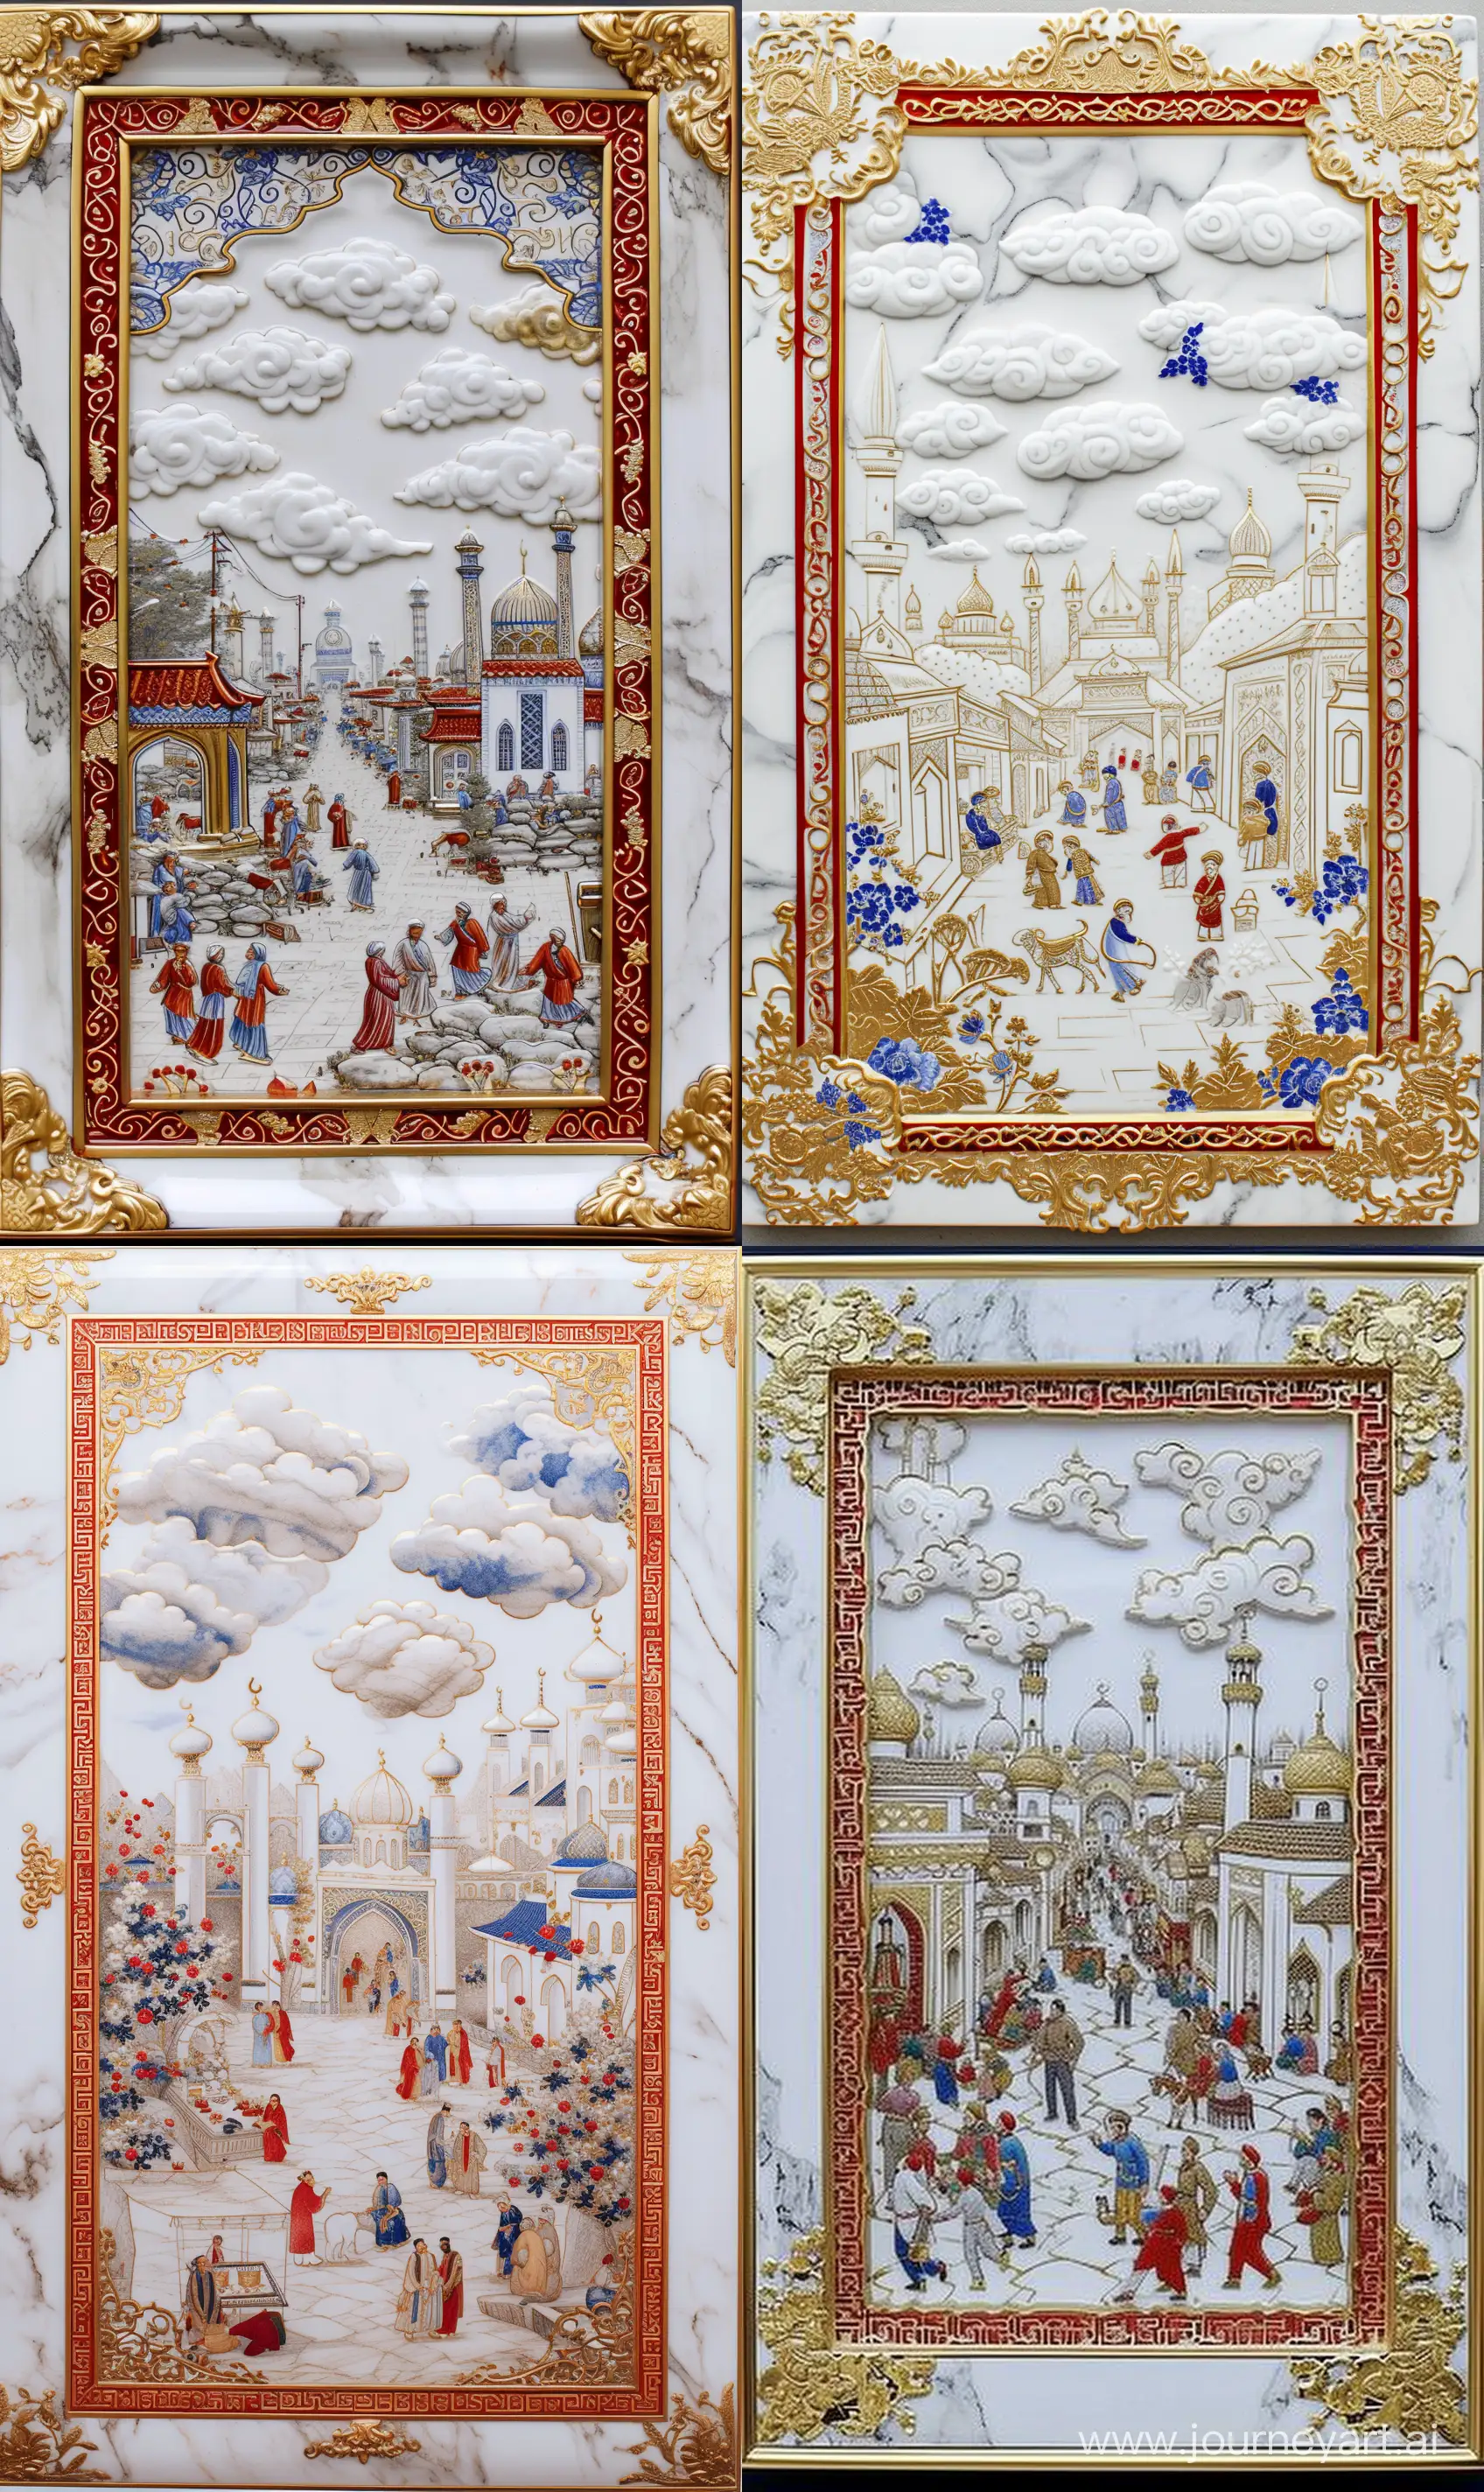 white marbled iznik porcelain frame: depicting a scene from a Persian miniature painting with Chinese clouds and mosques and people and street, gold outlines, red white blue persian and islamic arabesque floral motifs embossed around shiny golden border; front view --ar 3:5 --v 6